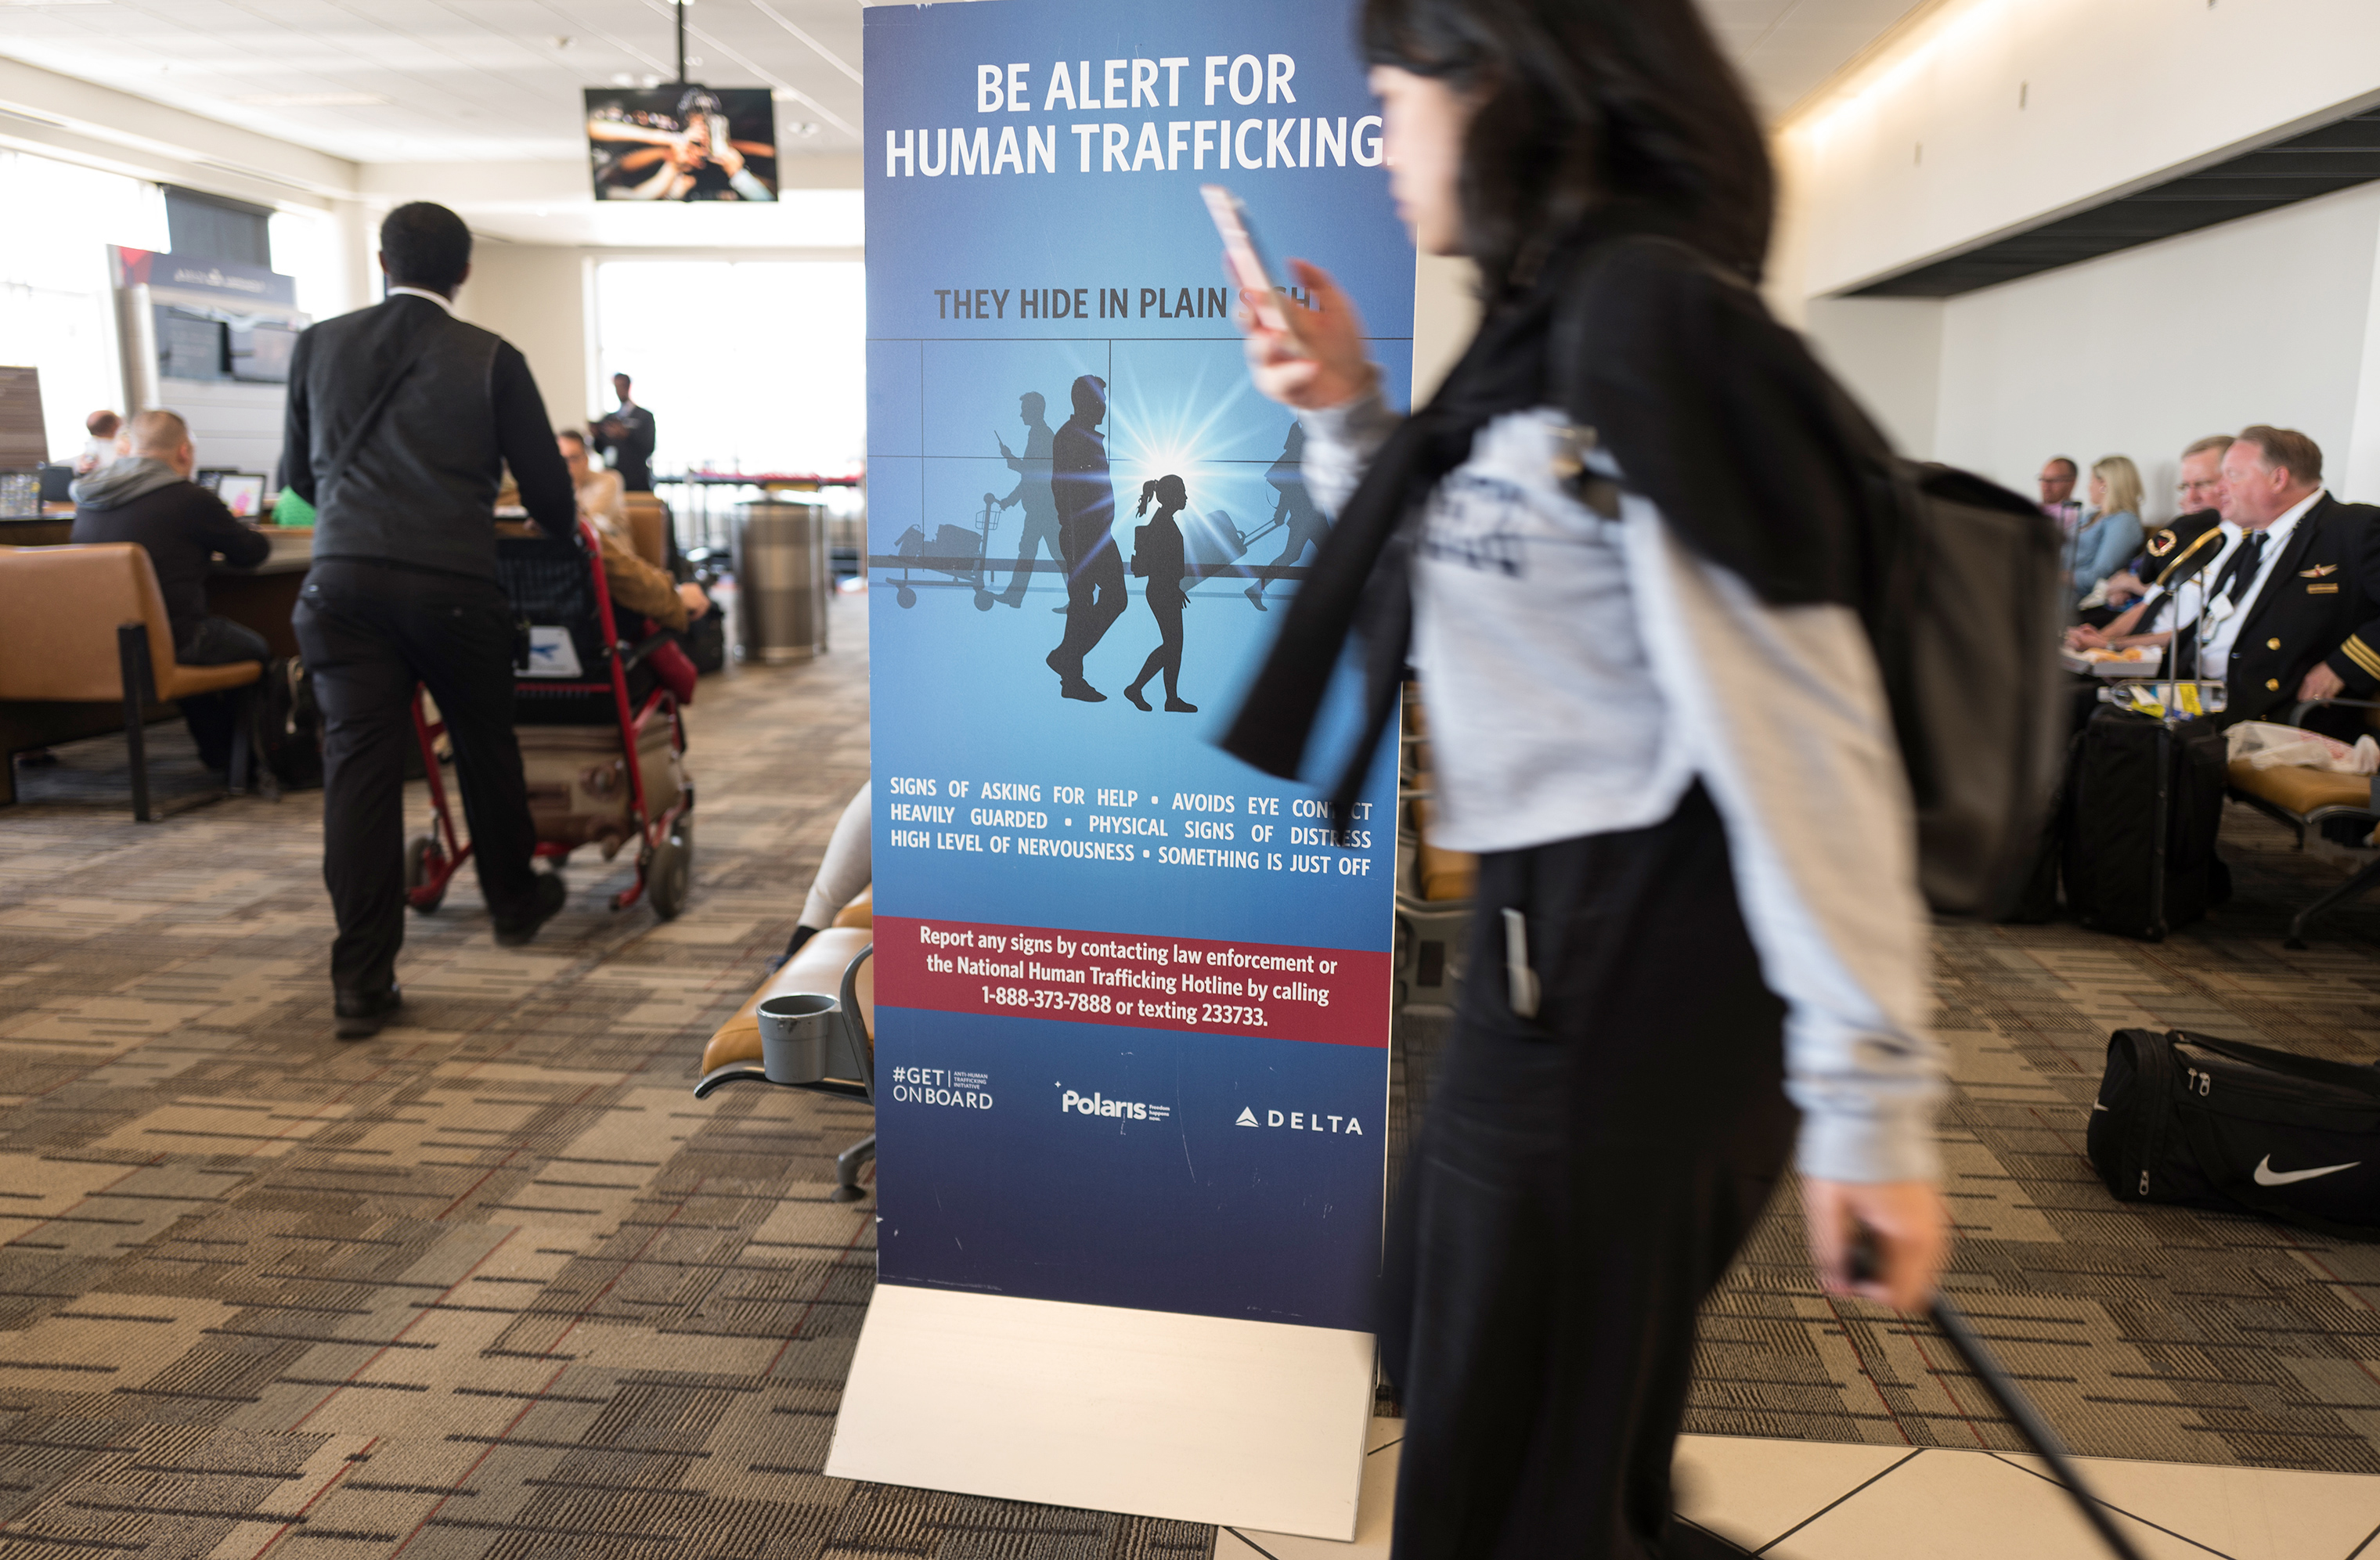 A human trafficking awareness sign in the airport in Minneapolis, MN, April 26, 2018. (Lynsey Addario for TIME)